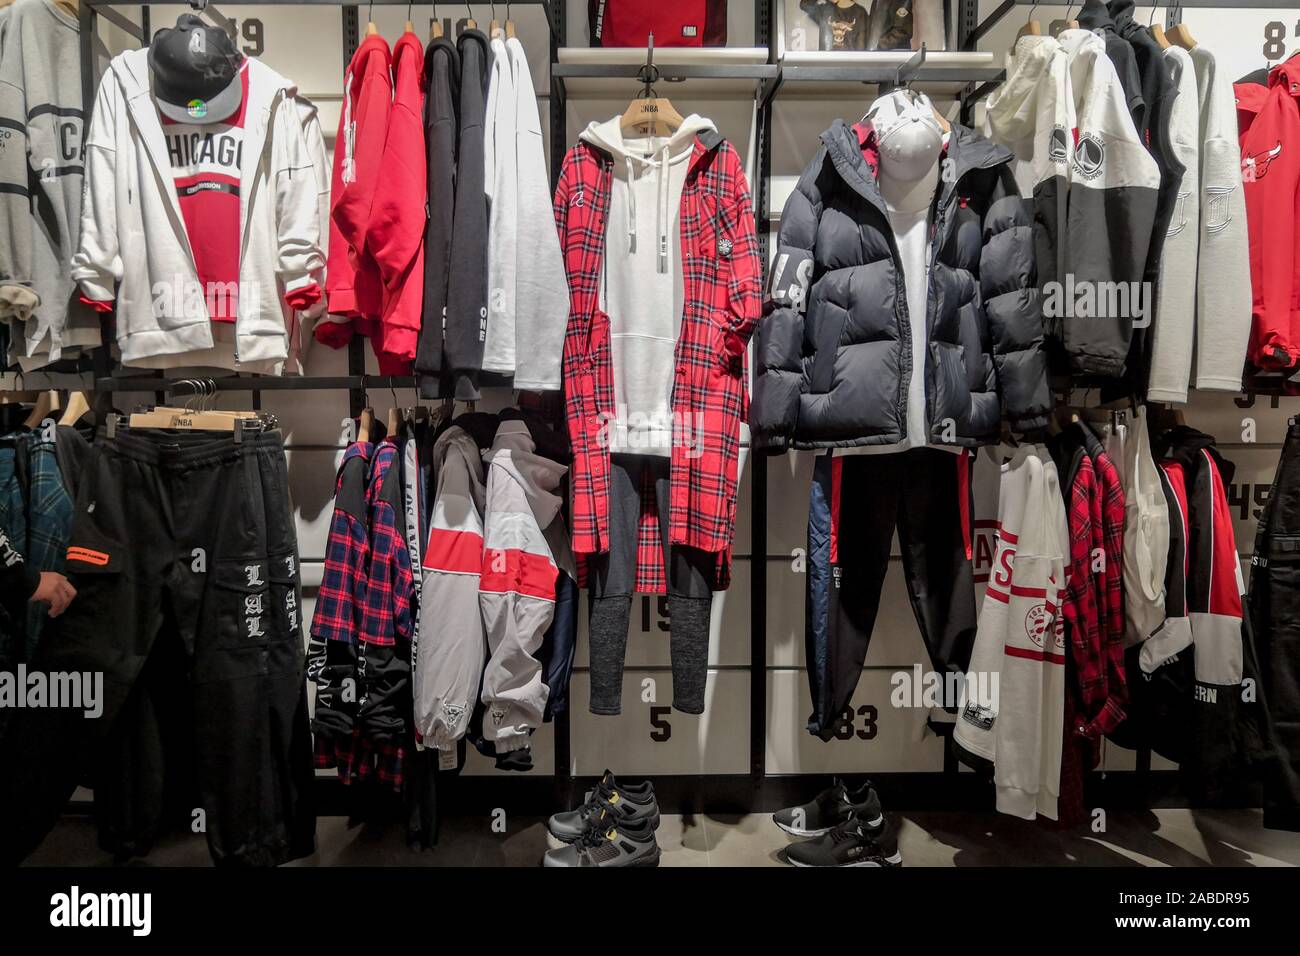 No customer appears at an NBA store, whose employee says he has no problem  changing jobs, and where products of Houston Rockets, a basketball team in  Stock Photo - Alamy